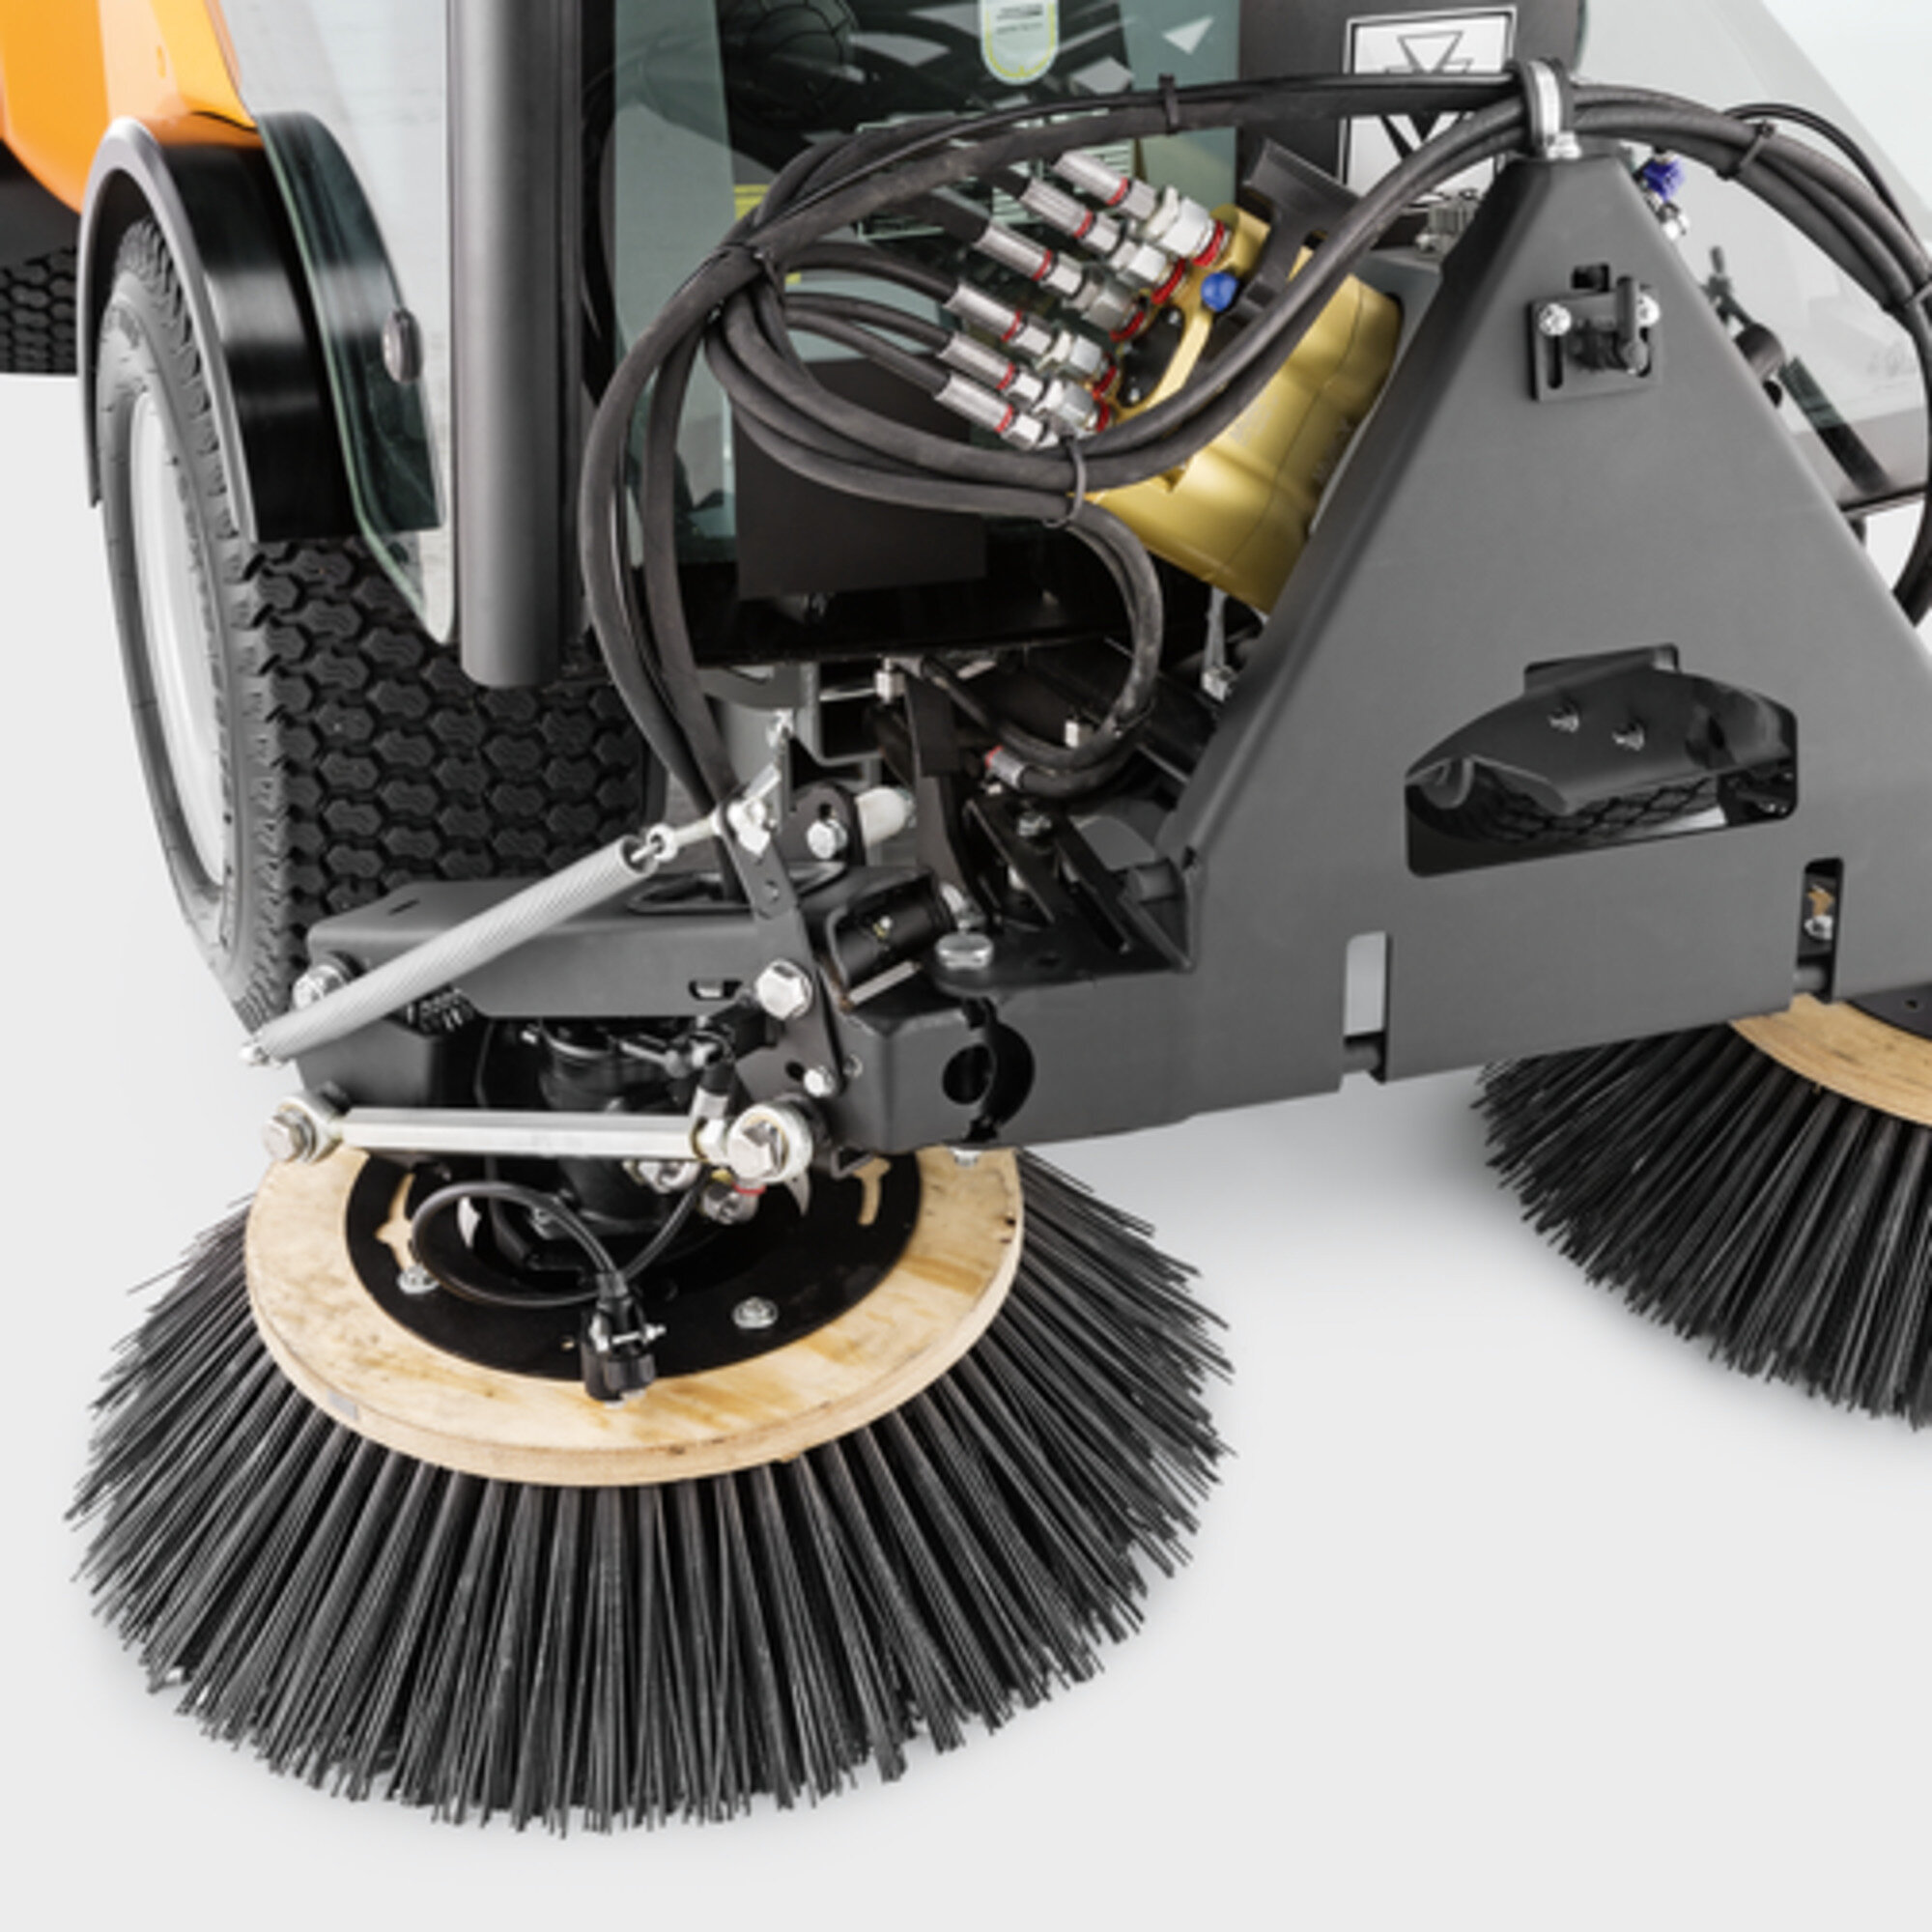 City sweeper MC 80: The highest standard of sweeping